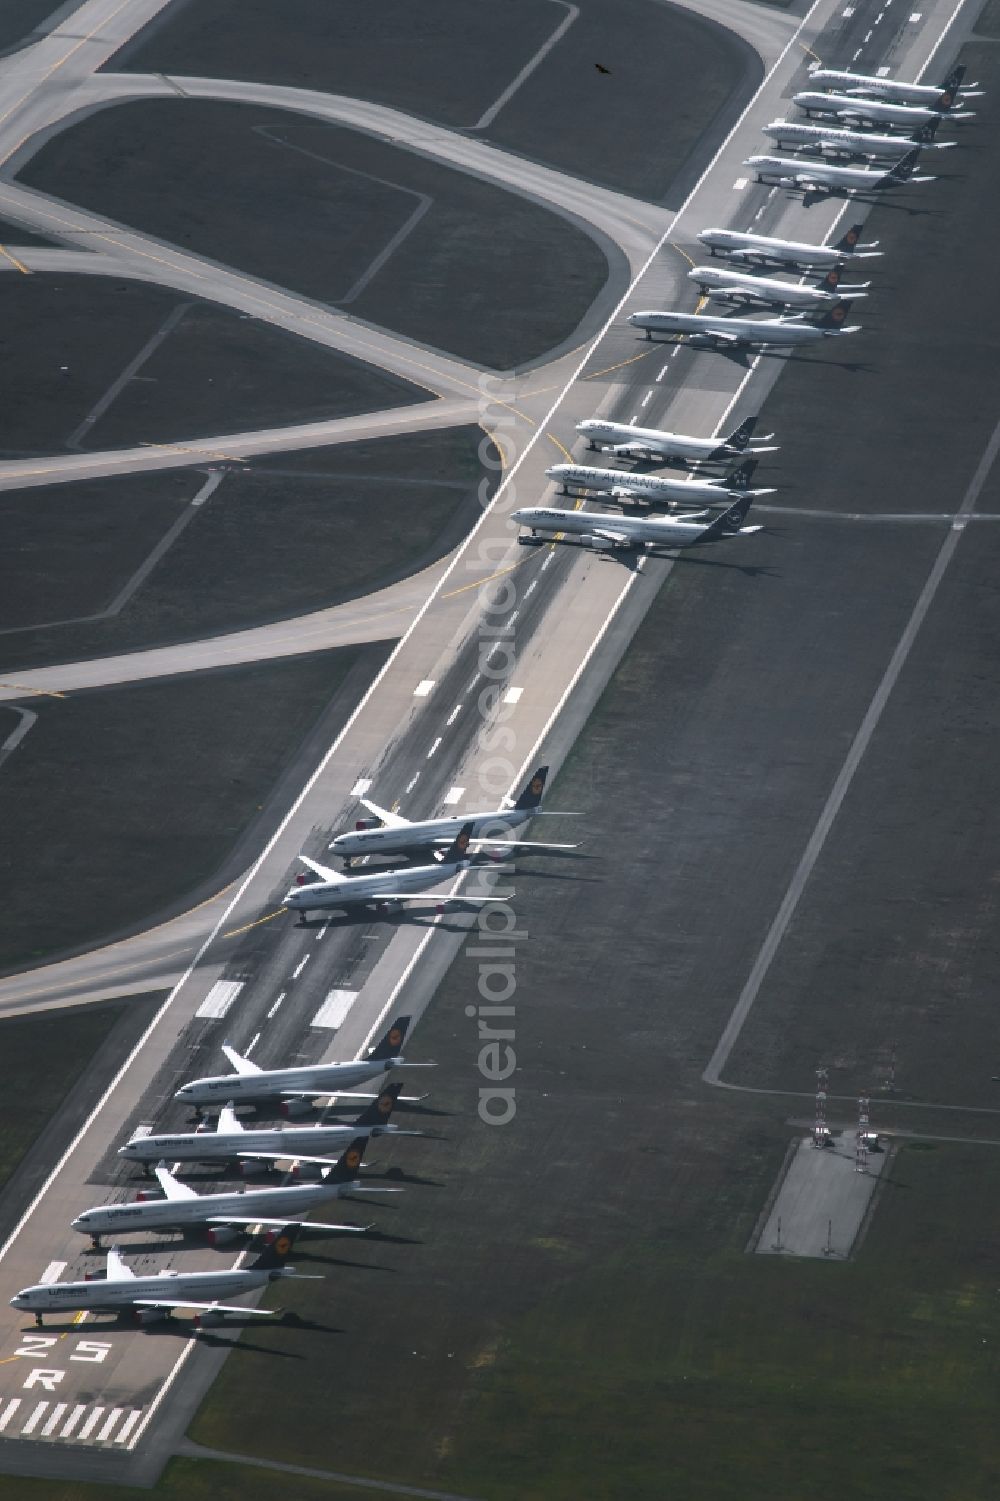 Aerial photograph Kelsterbach - Due to the crisis, passenger aircraft of the airline Lufthansa parked on the runway west in parking position on parking spaces at the airport Frankfurt Airport in Kelsterbach in the state Hesse, Germany